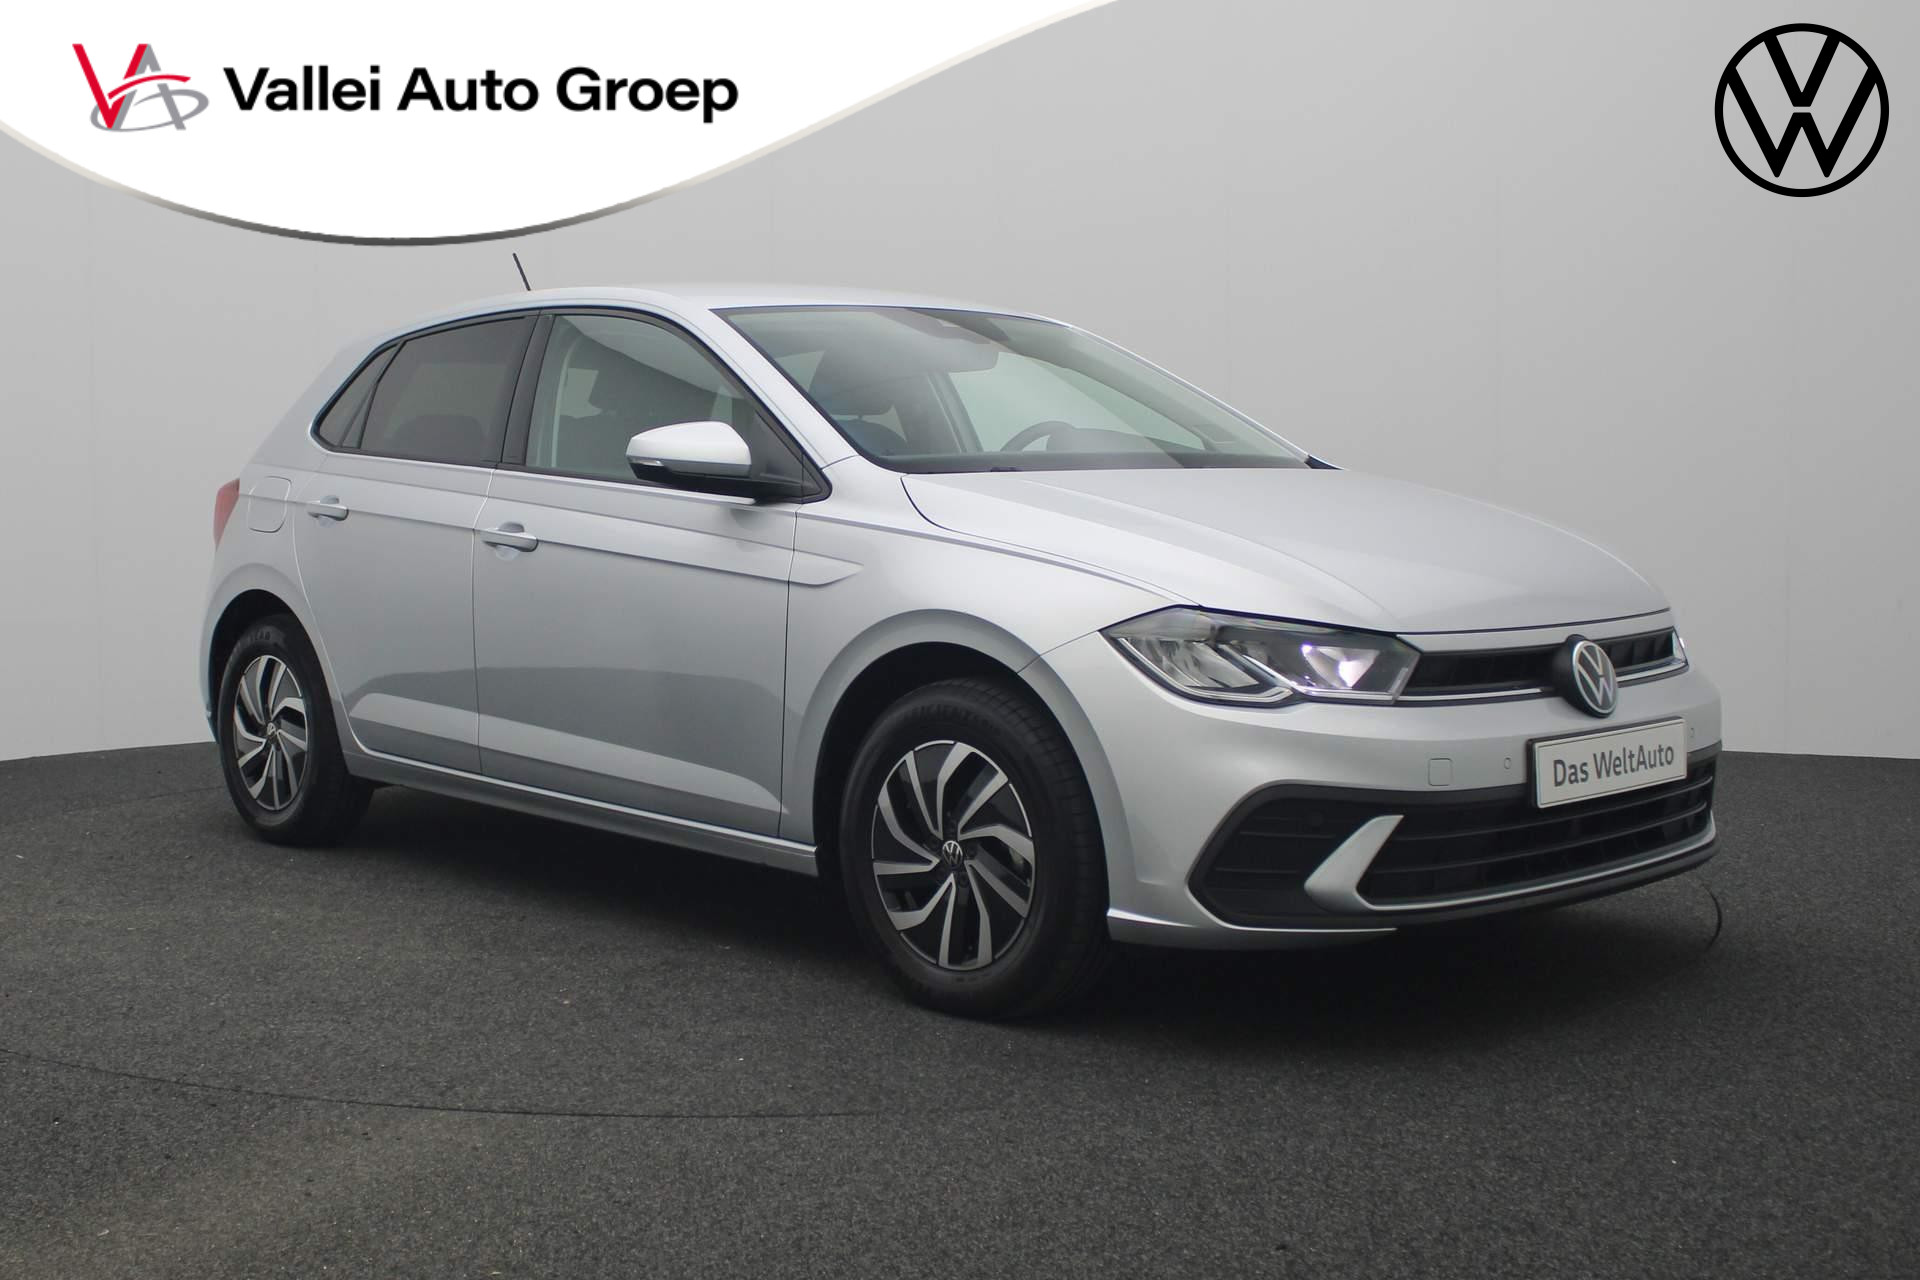 Volkswagen Polo 1.0 TSI 95PK Life | ACC | Parkeersensoren voor/achter | Apple Carplay / Android Auto | Airco | 15 inch